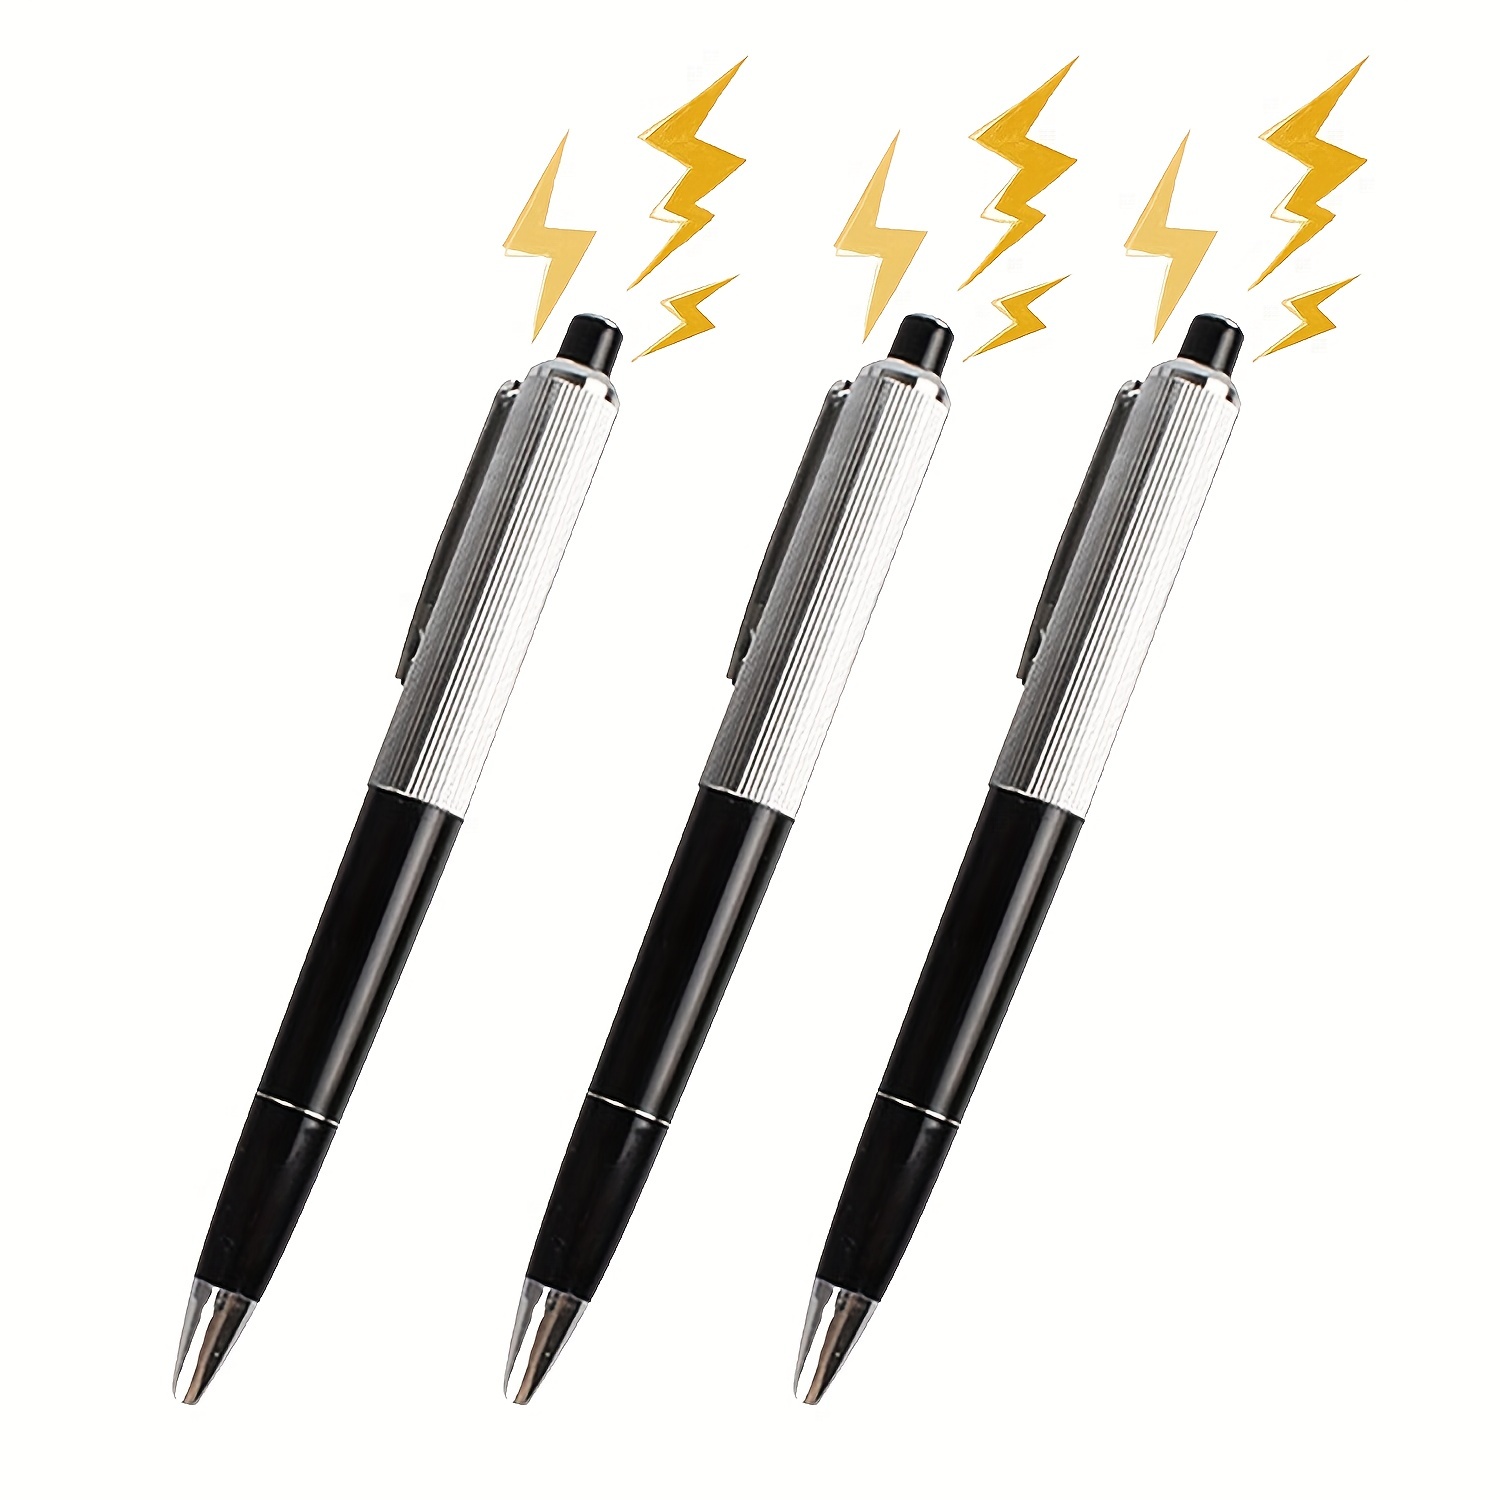 Creative Trick Props Electric Shock Pen Slightly Numb People Can Write  Ballpoint Pens To Decompress And Spoof Classmates' Small Toys In Class.